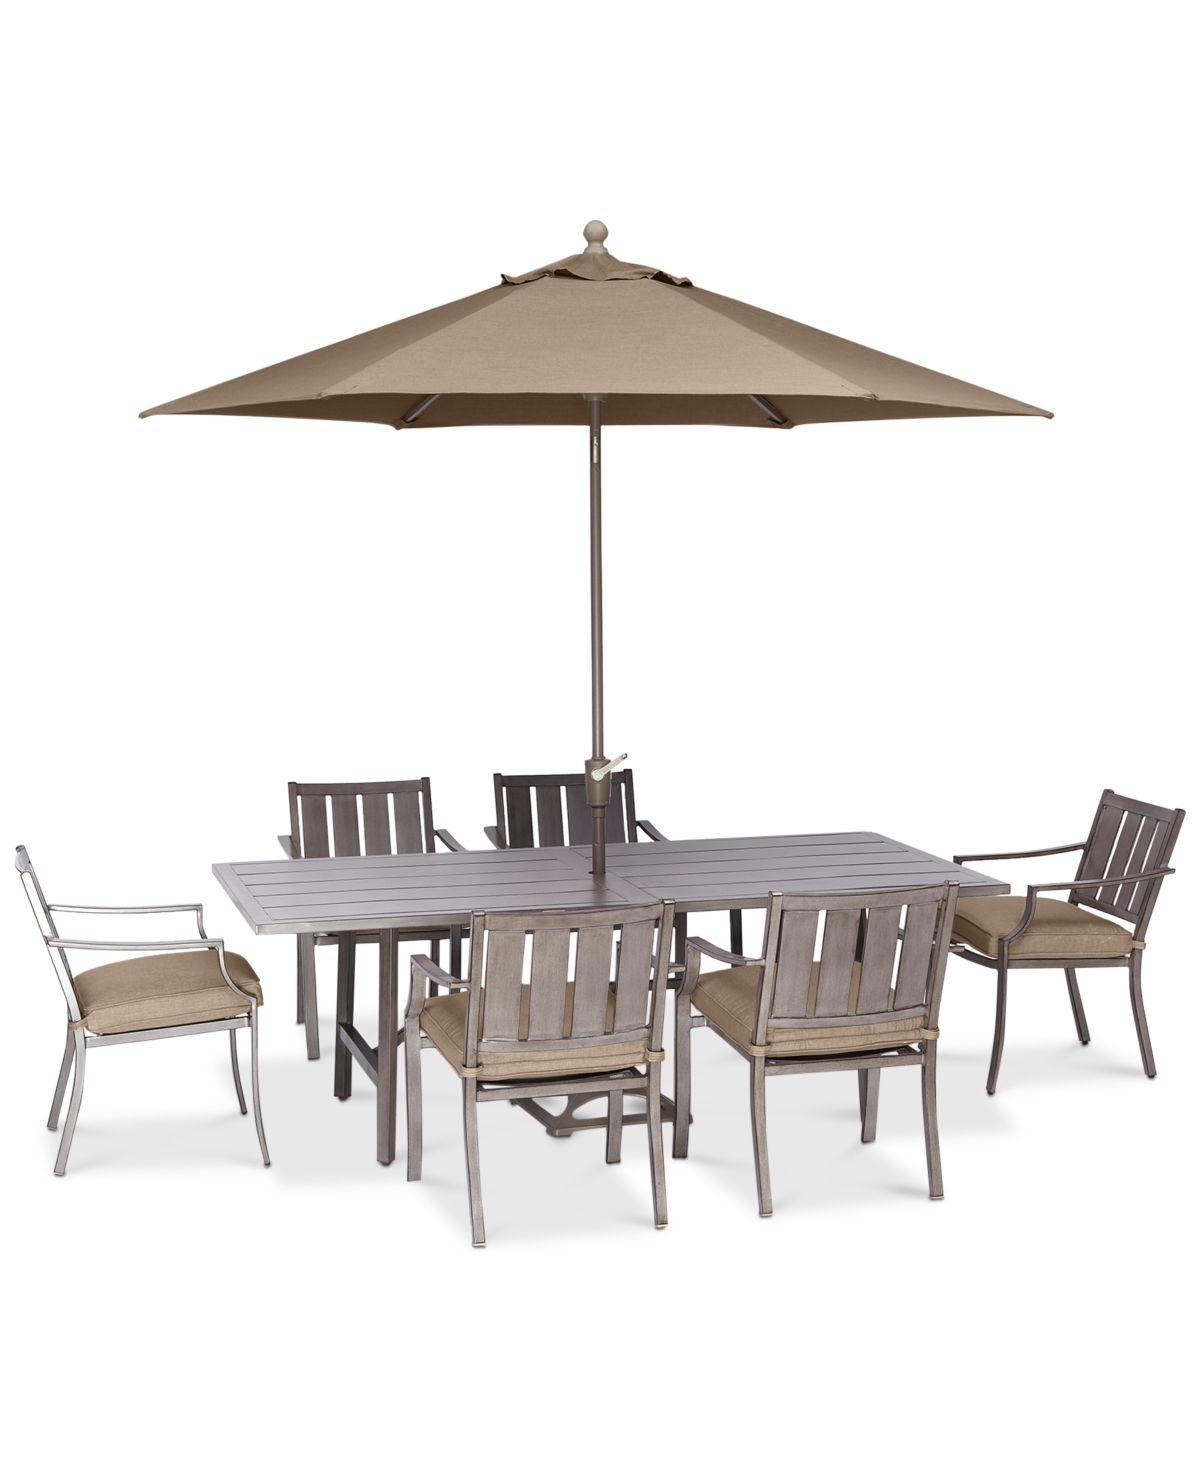 Agio Wayland Outdoor Aluminum 7-pc. Dining Set (84" X 42" Rectangle Dining Table & 6 Dining Chairs), Crea In Outdura Remy Pebble